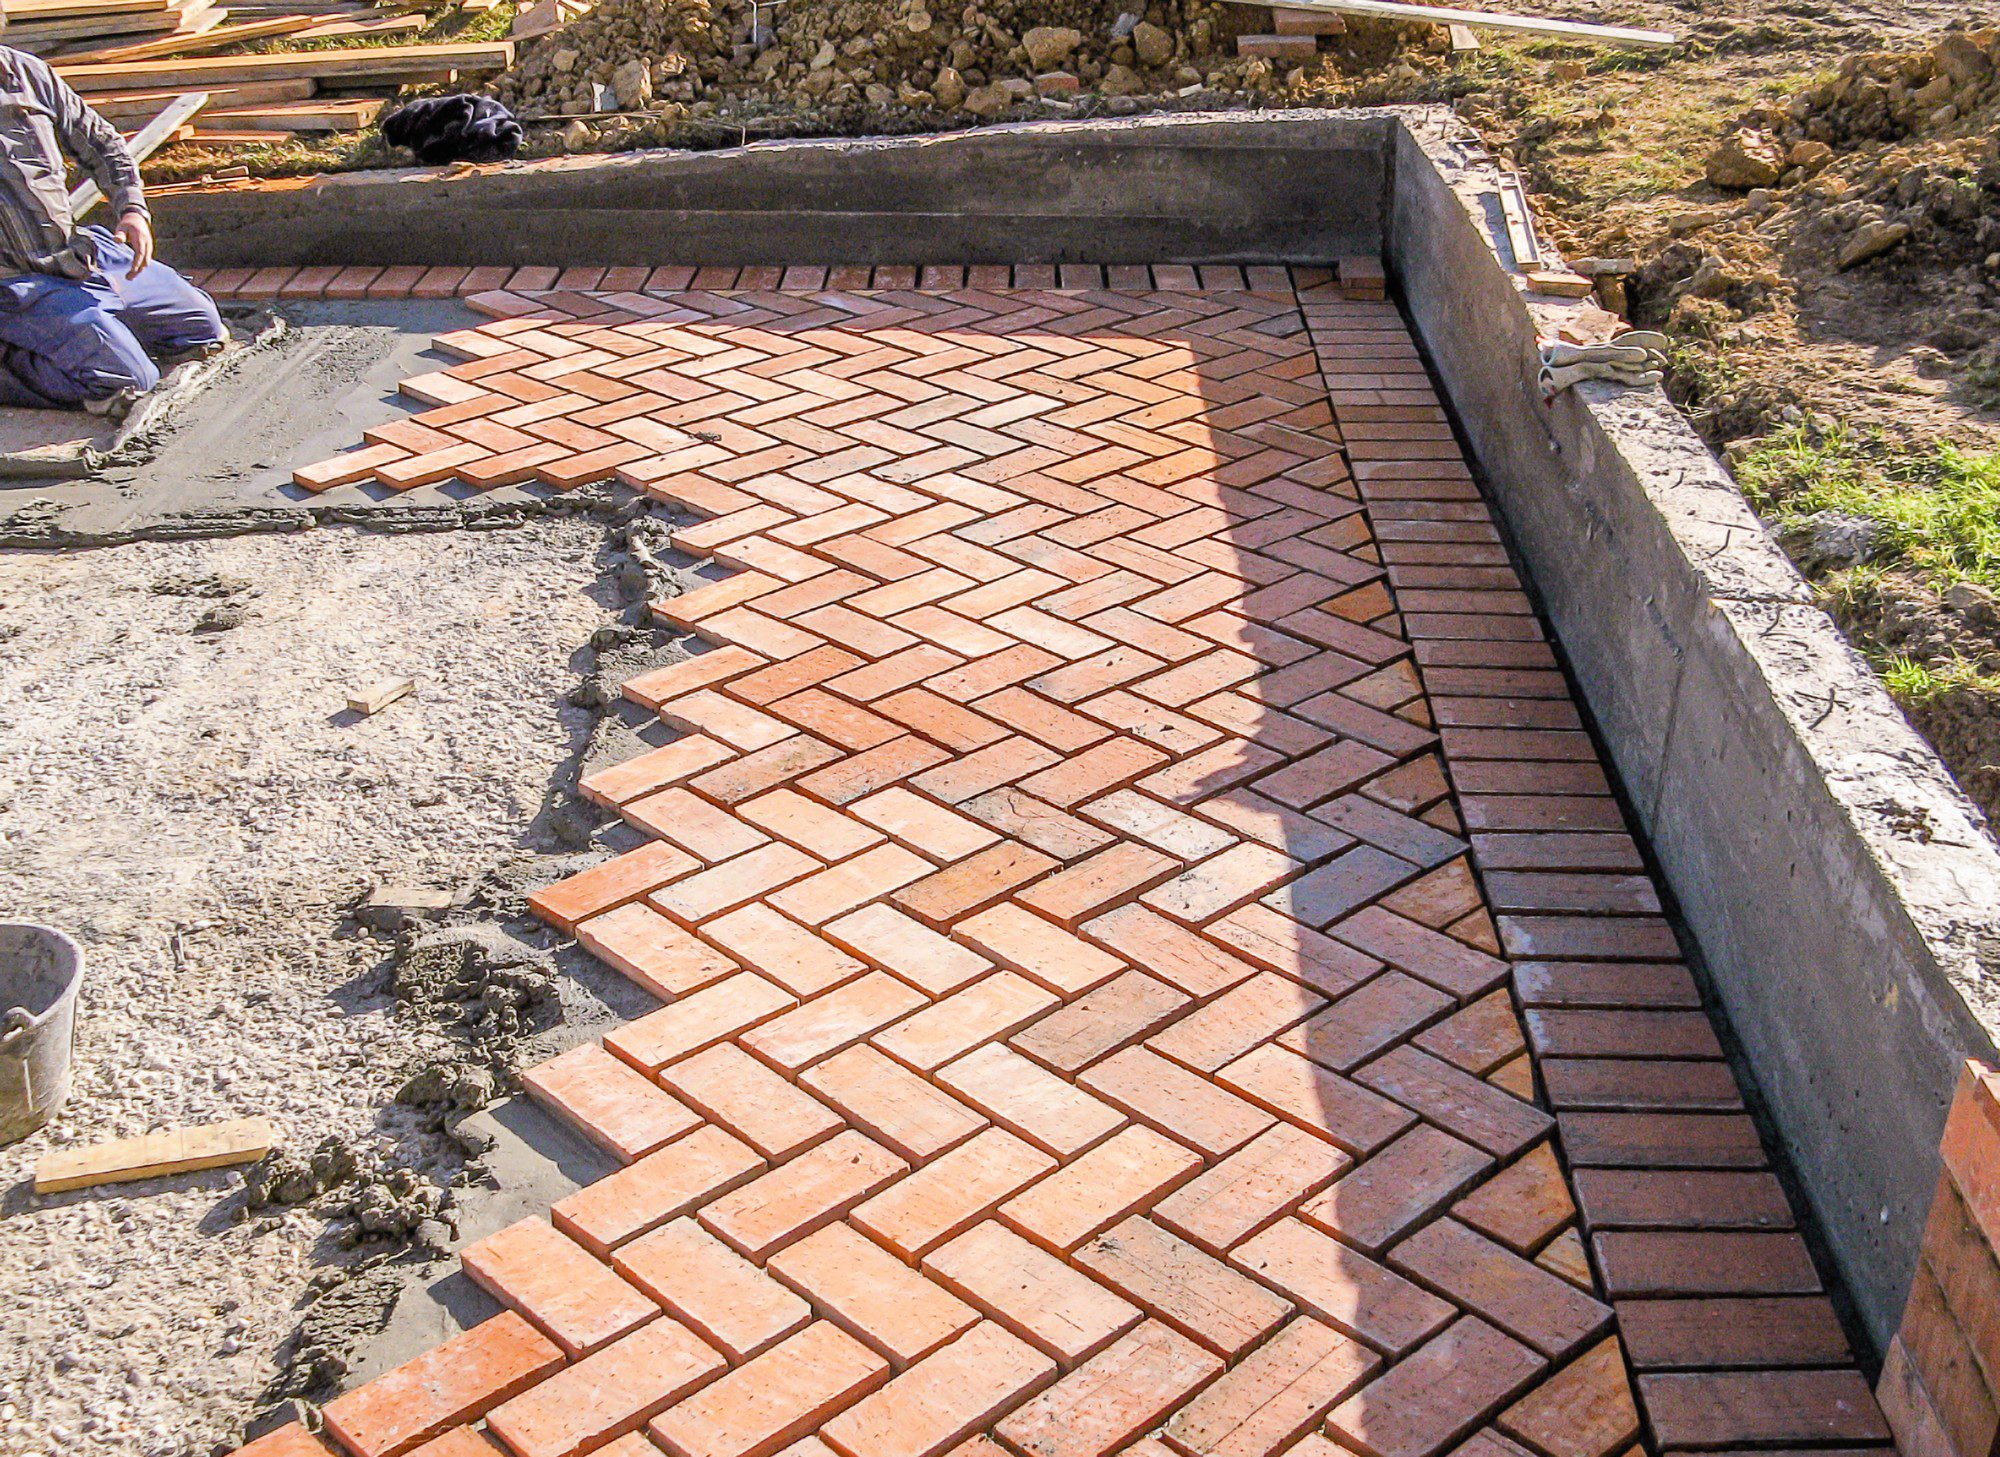 The image shows a construction or renovation site where brick pavers are being laid in a herringbone pattern to create a hard, durable surface, likely for a patio or a walkway. A concrete retaining edge surrounds the area where the bricks are being installed, which helps to keep them in place and maintain the structure's shape. There is construction material and debris around the site, including a bucket, piles of soil, and other building materials. In the background, there appears to be a person sitting on the ground wearing work clothes, possibly taking a break or assessing the work done so far, and next to them is a calm black dog lying on the ground. The unfinished area with exposed concrete suggests that the work is still in progress.